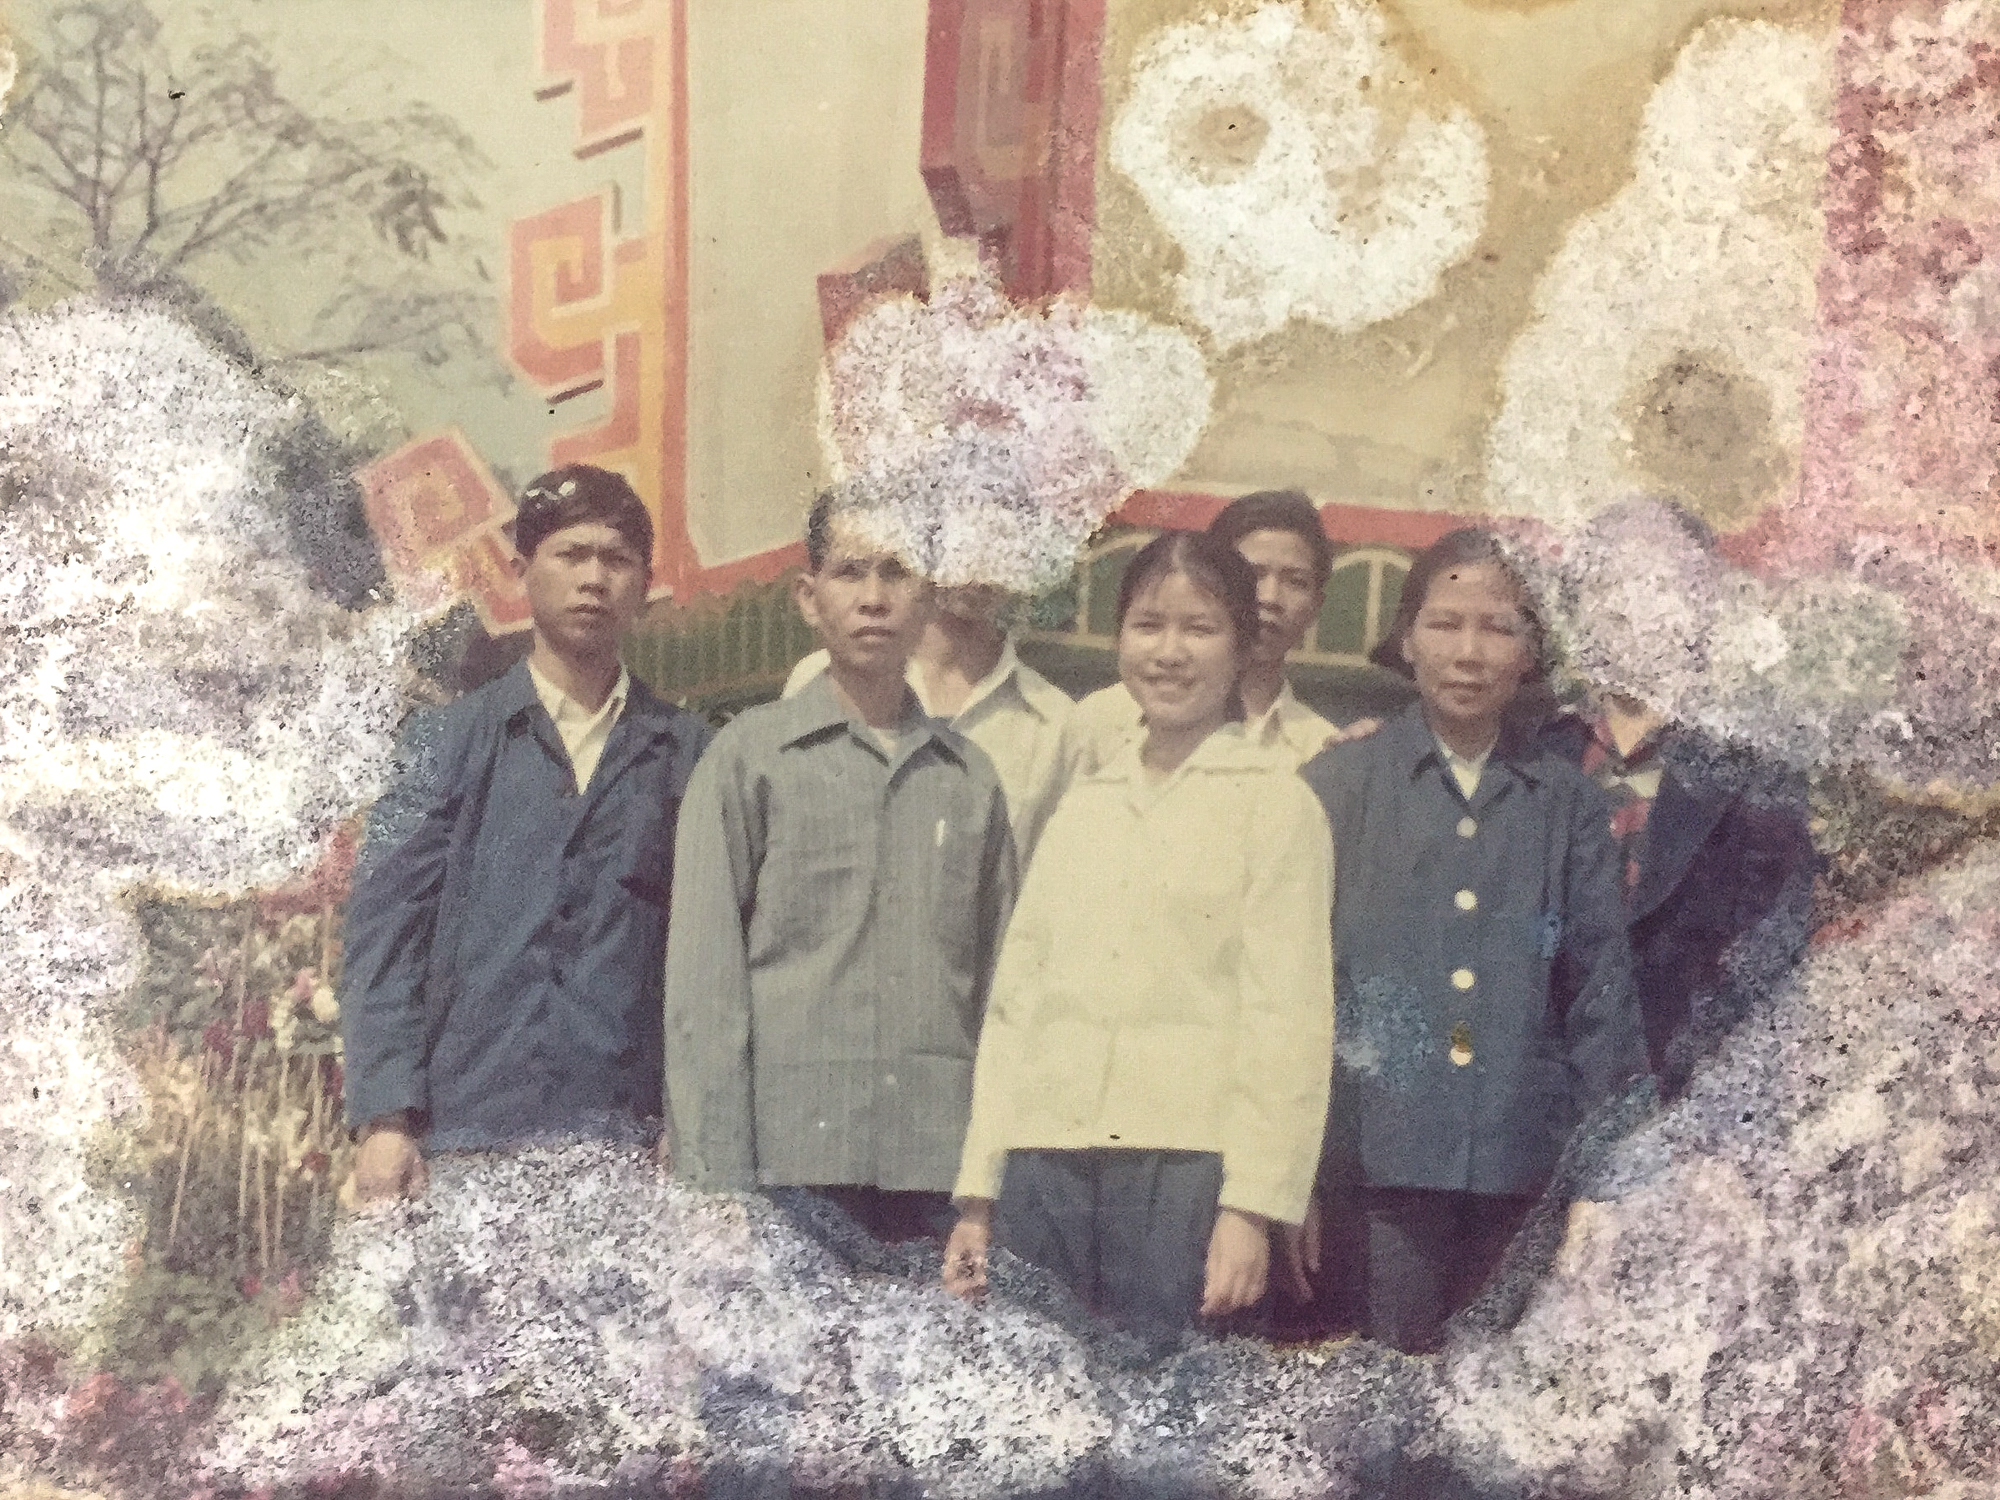 Kwok’s father (far right) and his family in Guangzhou, in a photo taken in the 1970s. Kwok’s father migrated to Hong Kong in the 1980s.